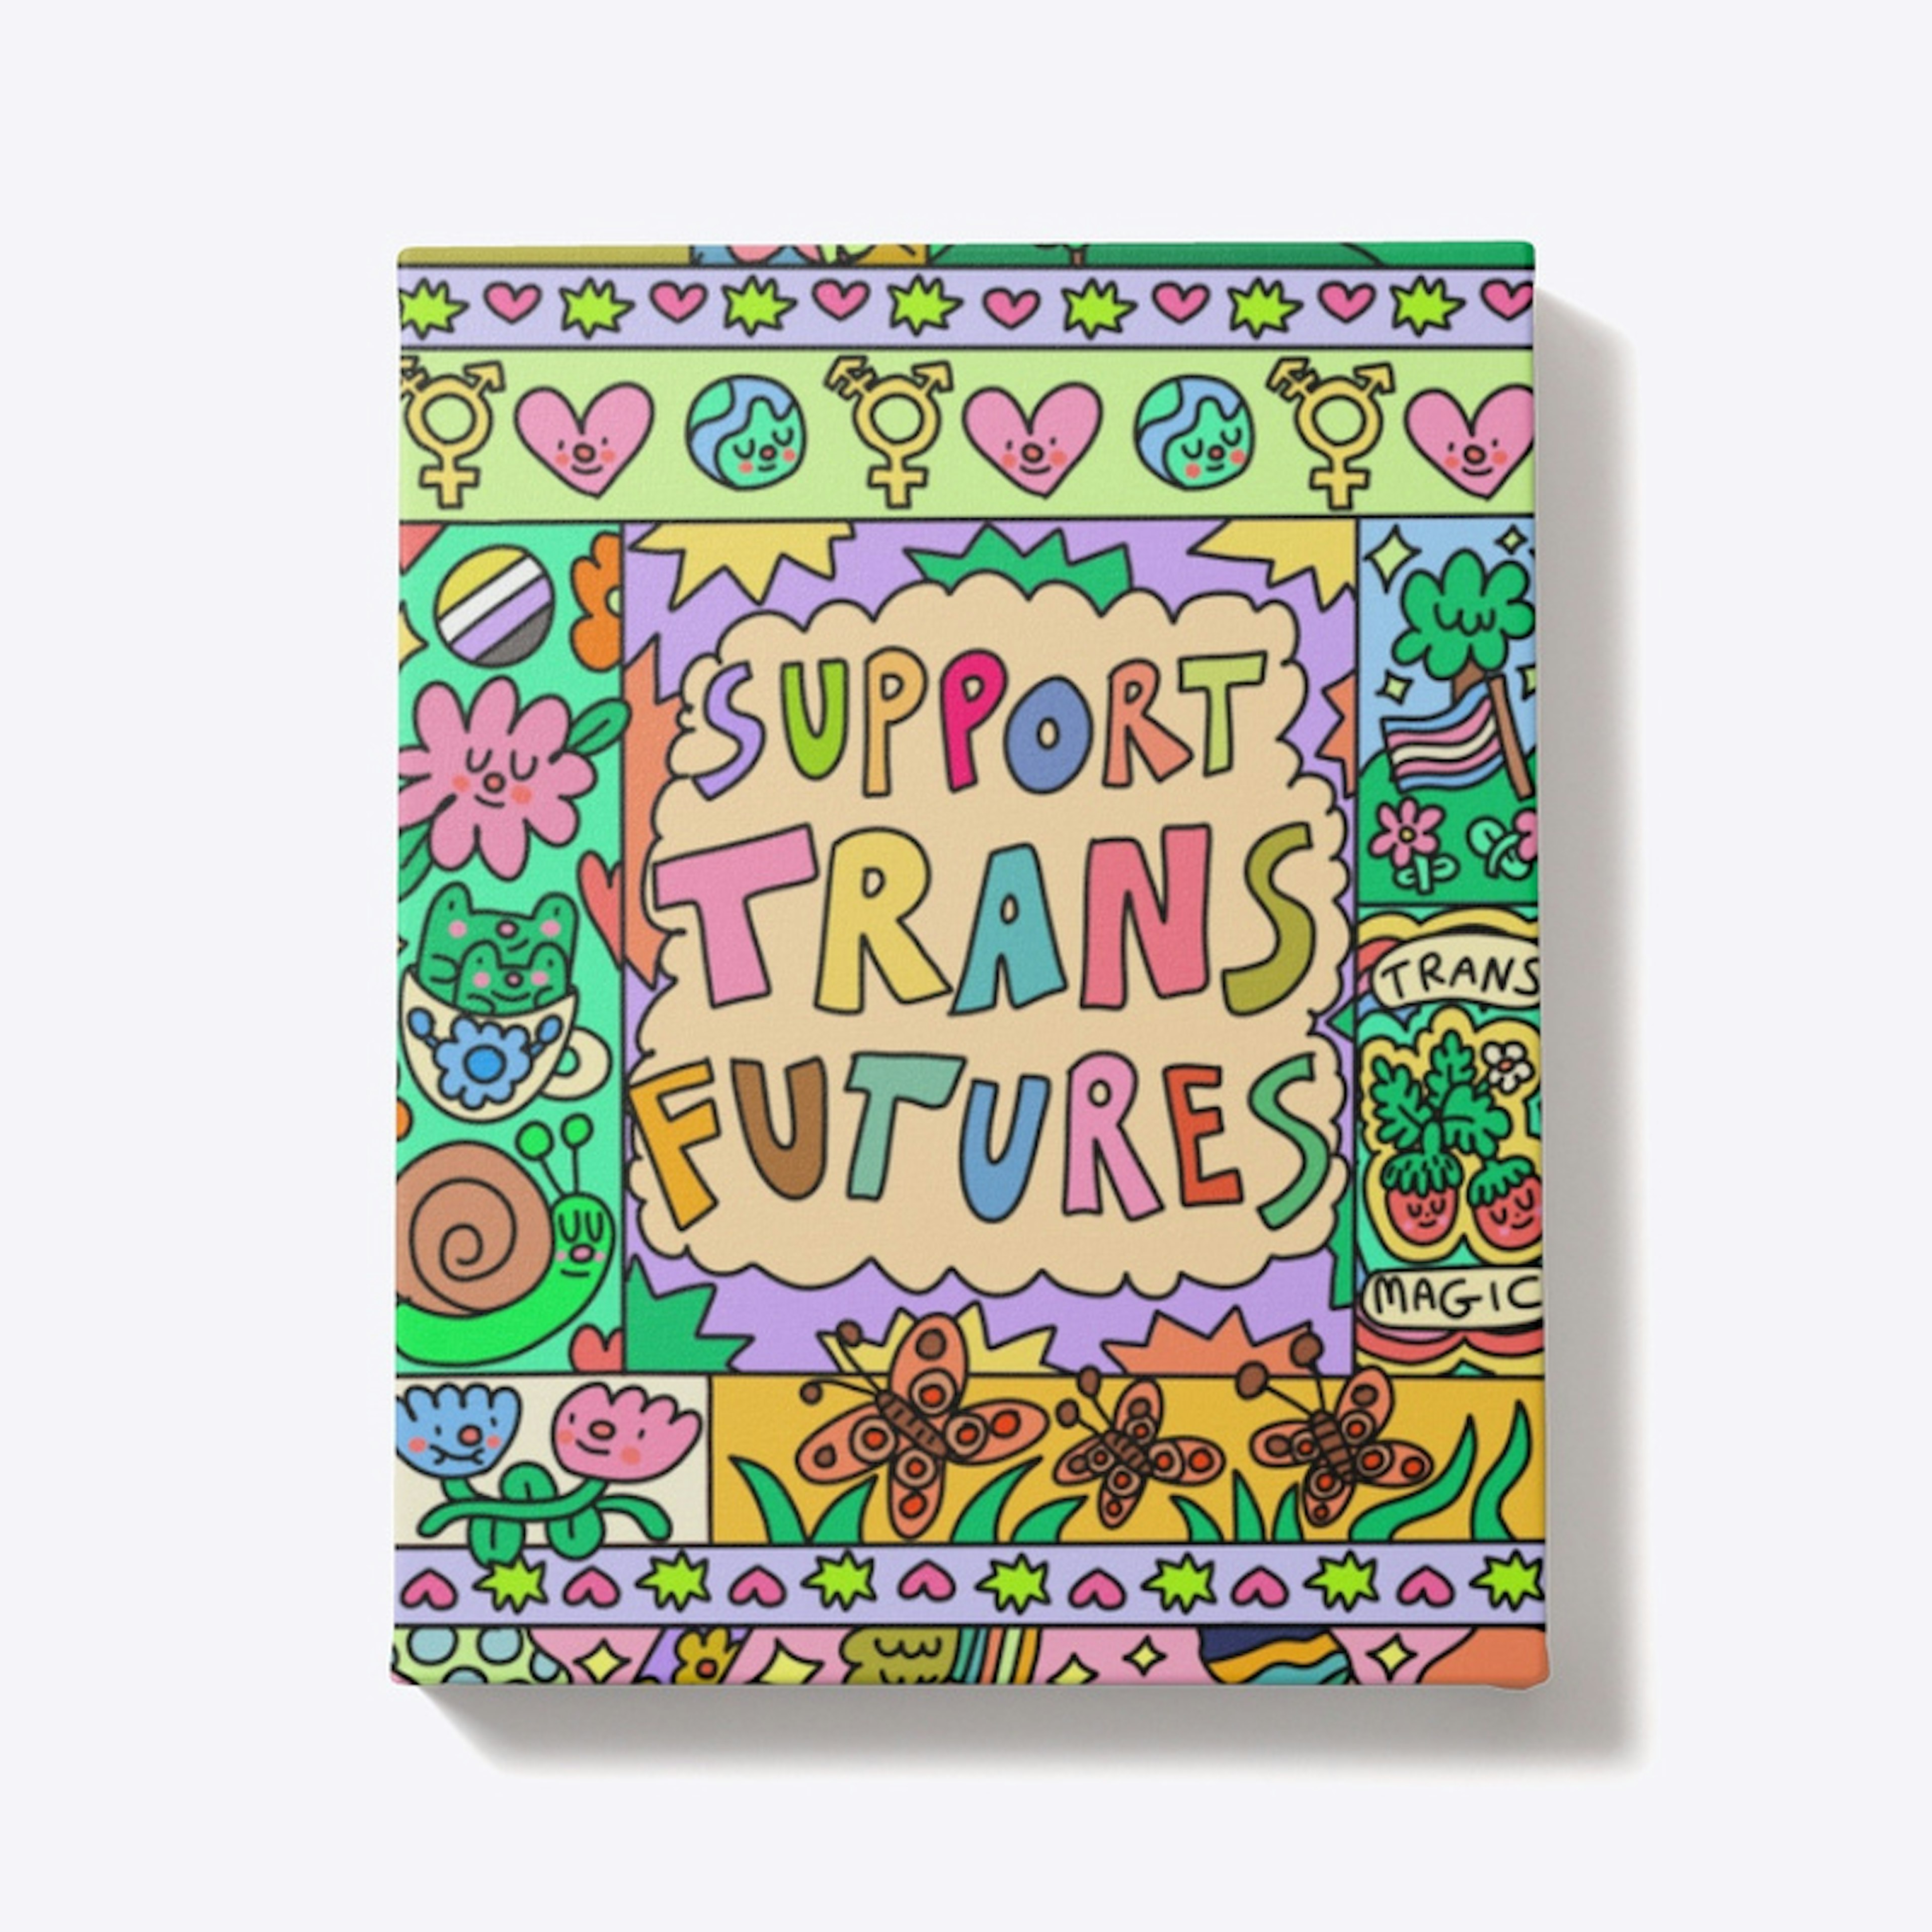 Support trans futures